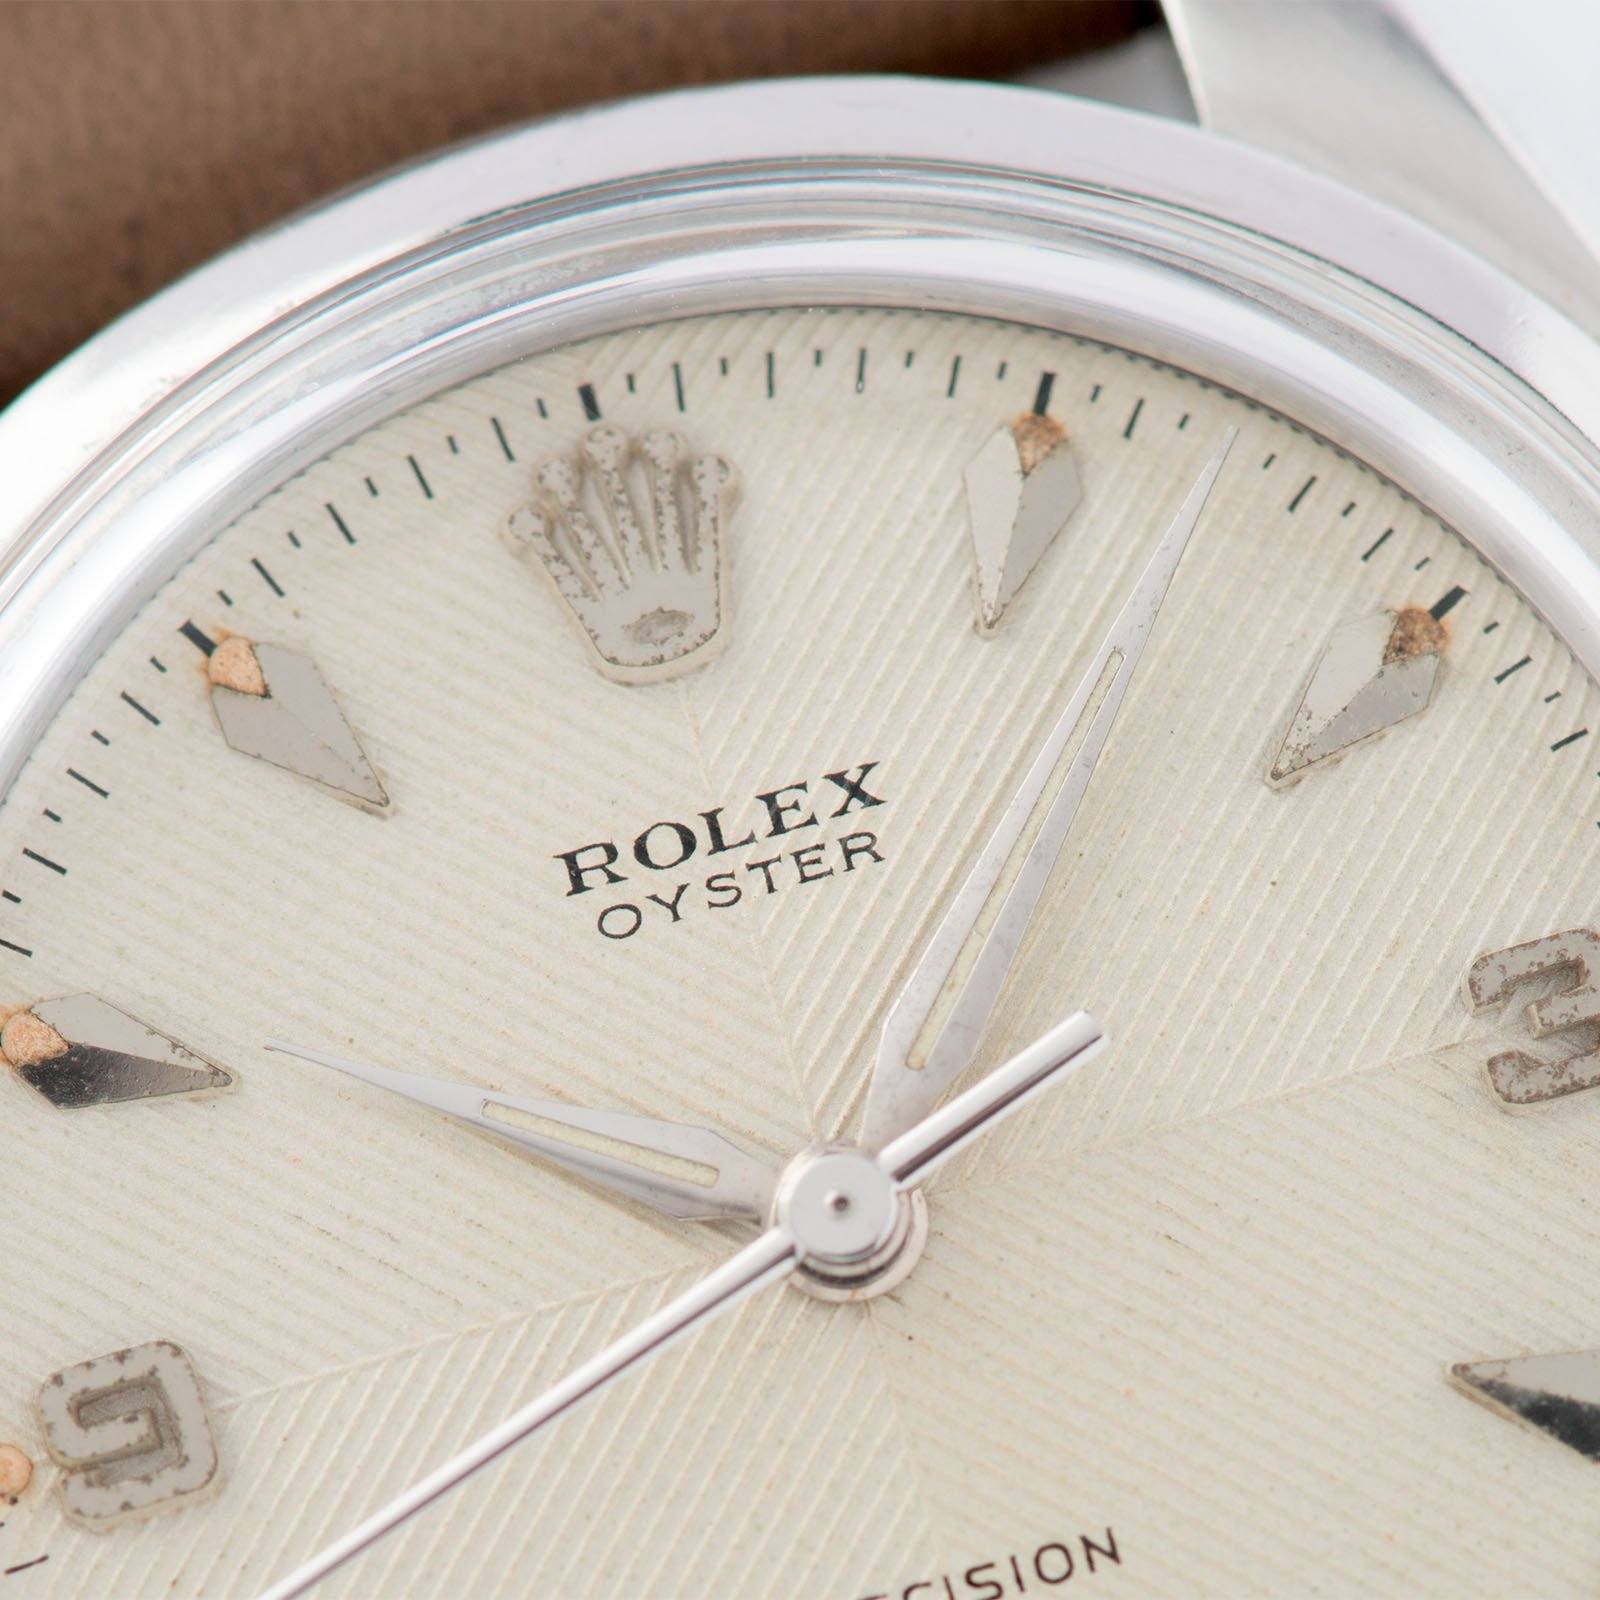 Rolex Oyster Precision 369 Dial 6422